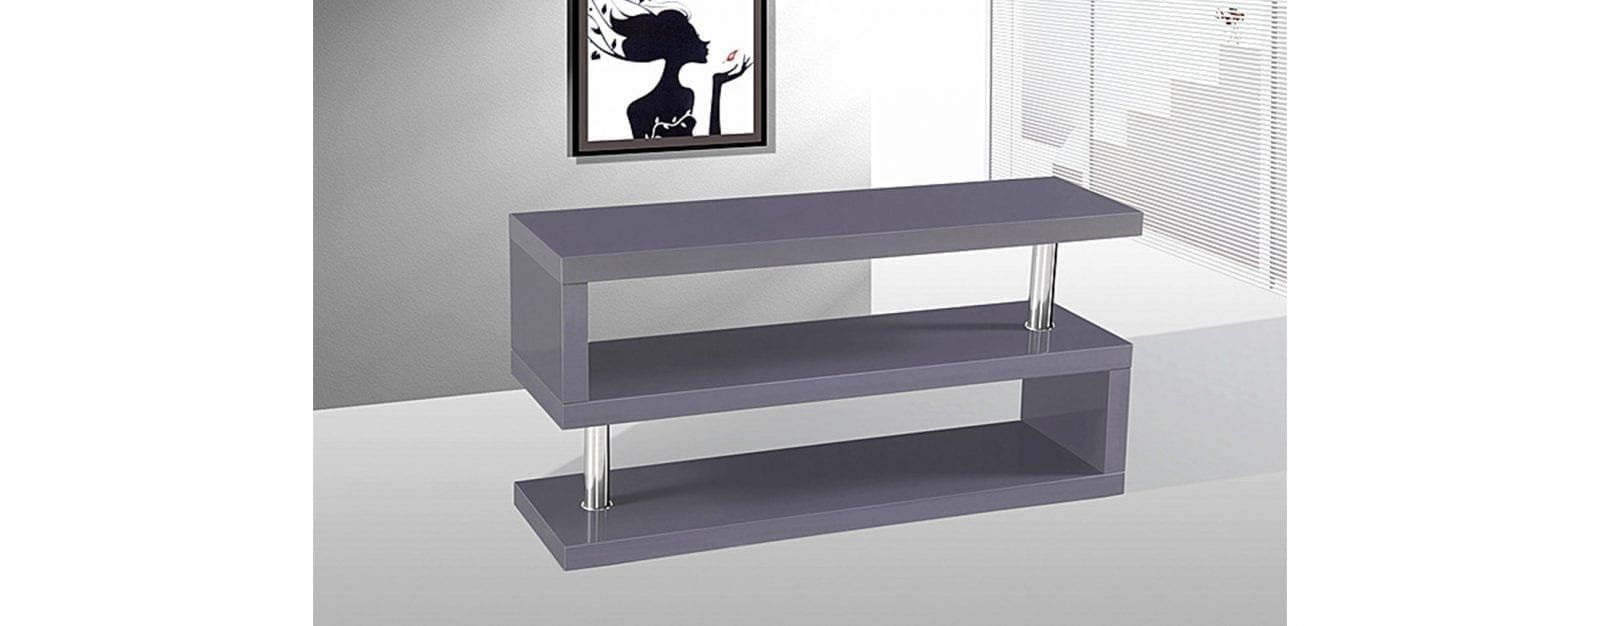 Charisma Tv Stand In Grey High Gloss | Allans Furniture For Charisma Tv Stands (View 12 of 15)